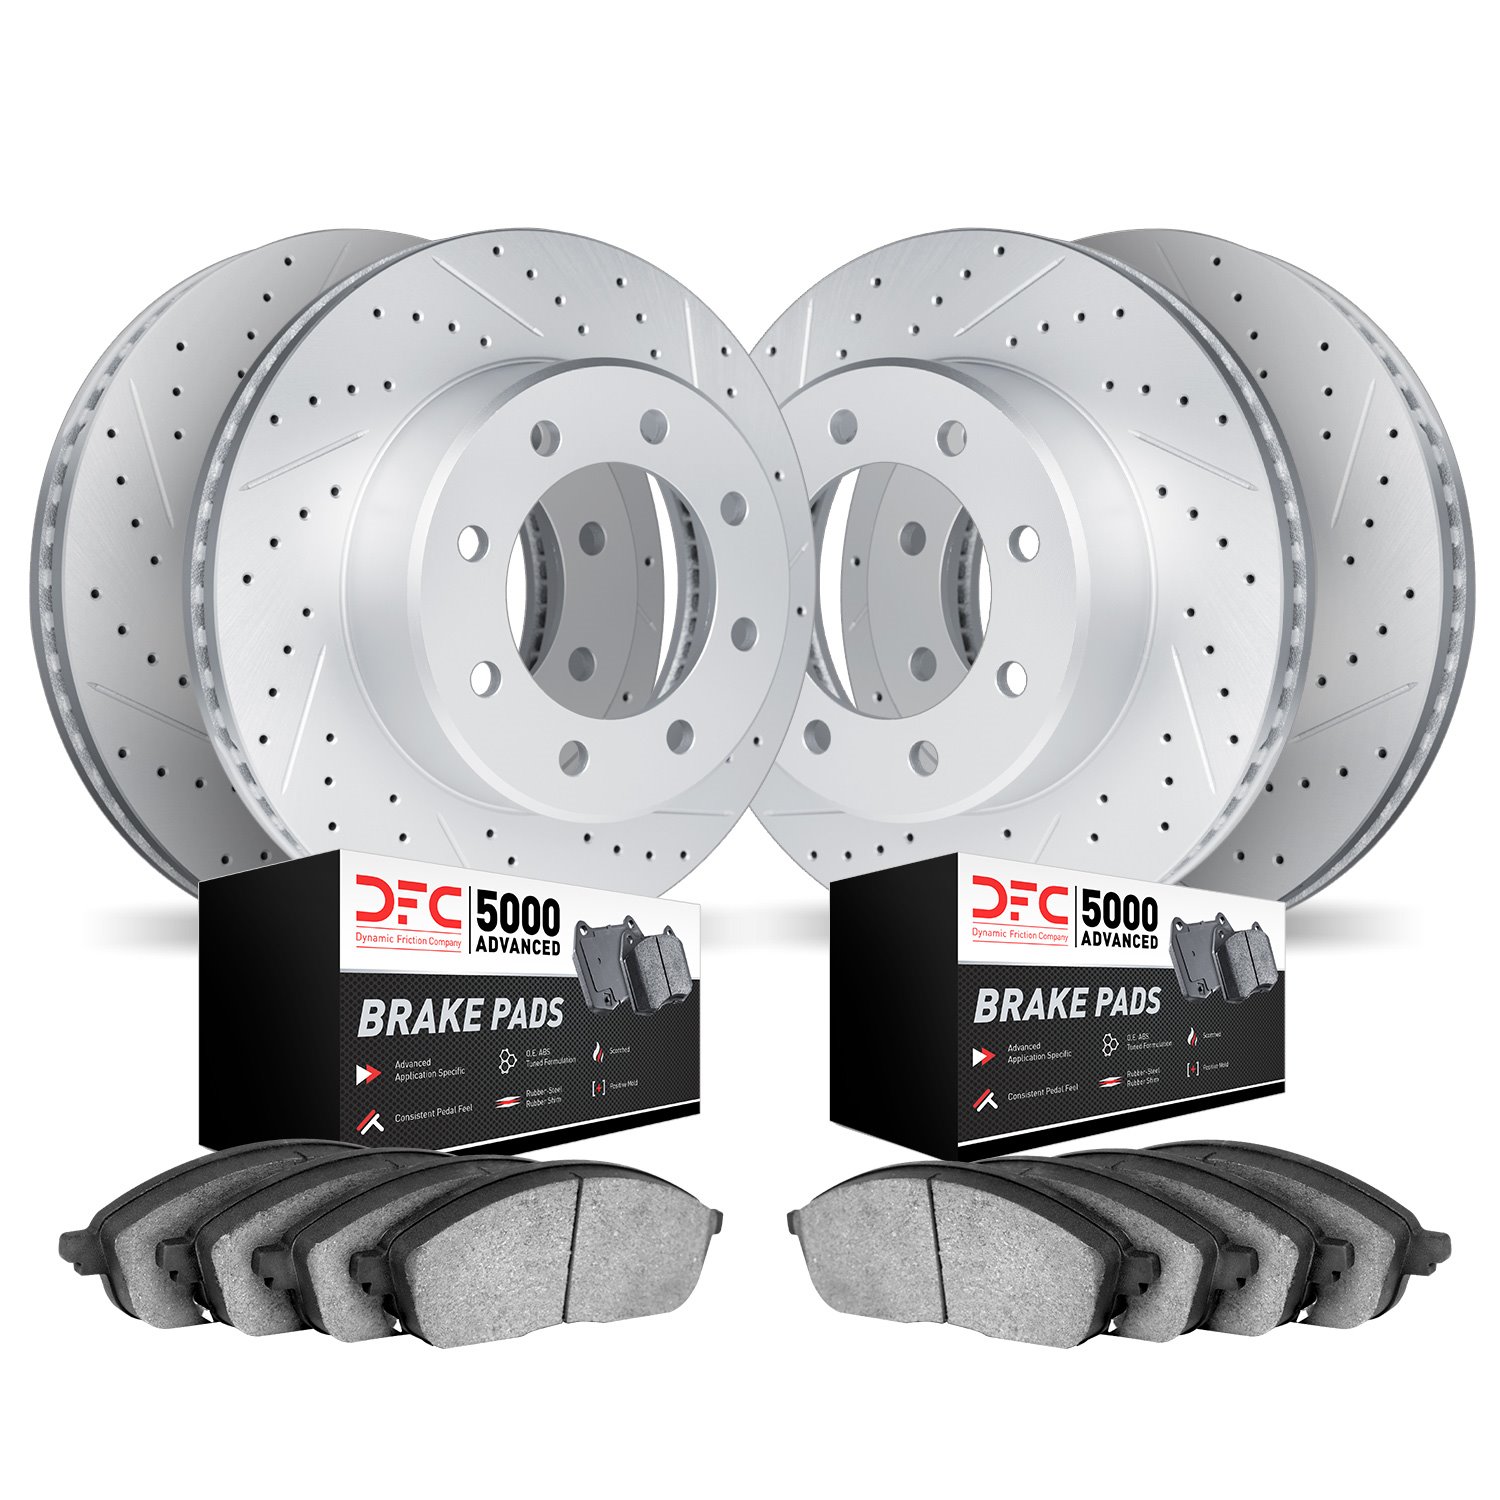 2504-48010 Geoperformance Drilled/Slotted Rotors w/5000 Advanced Brake Pads Kit, 2018-2020 GM, Position: Front and Rear